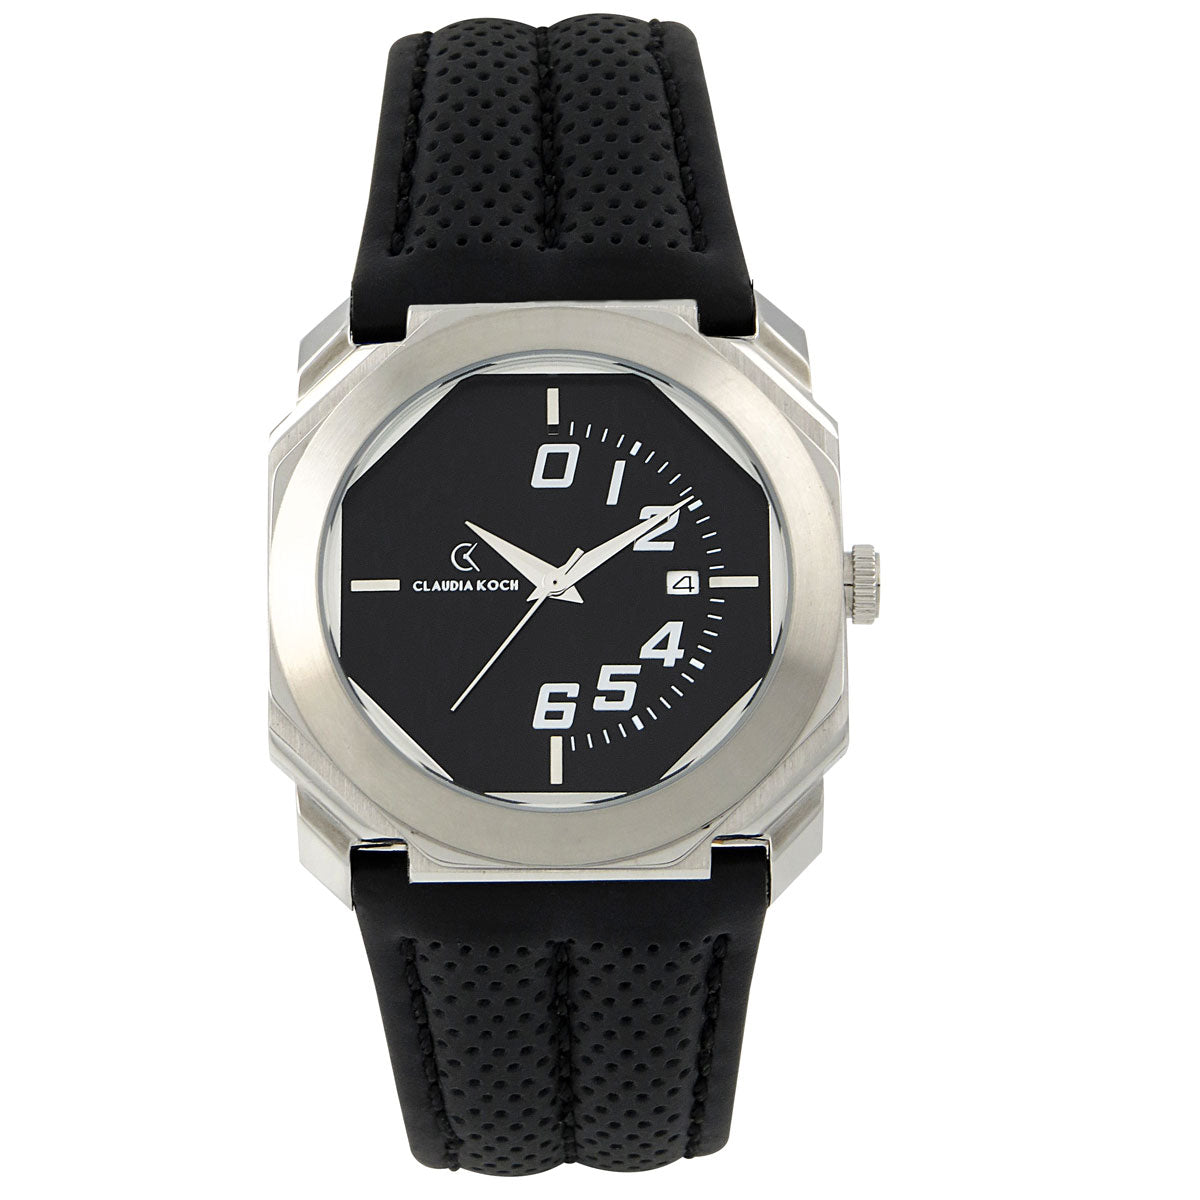 Rubber Band Stainless Date Analog Classy Men Watch